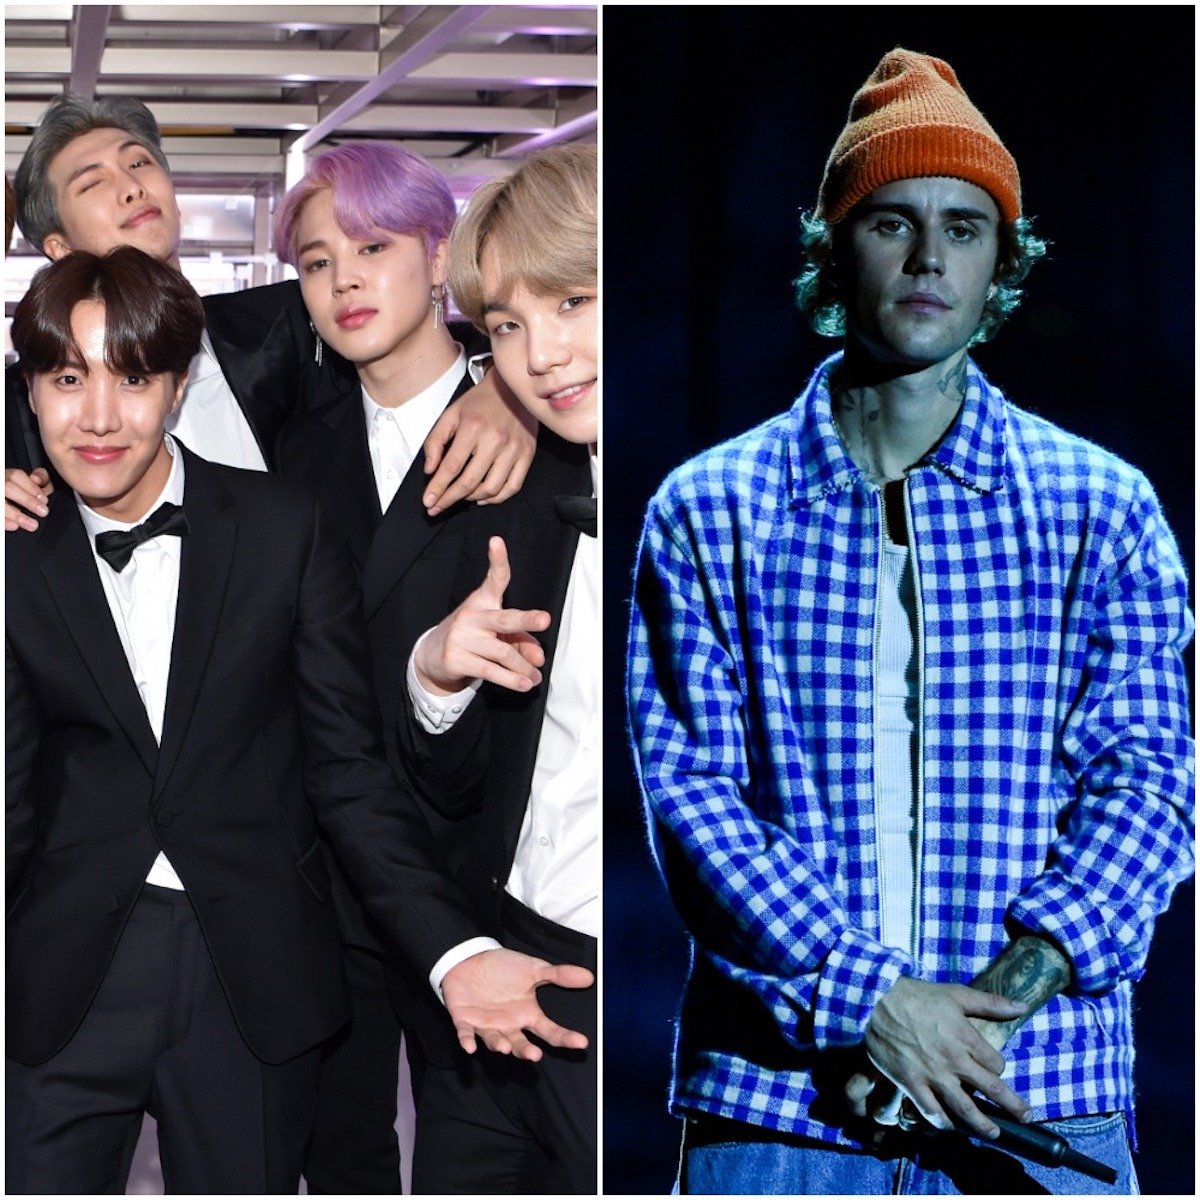 BTS poses and Justin Bieber performs on stage